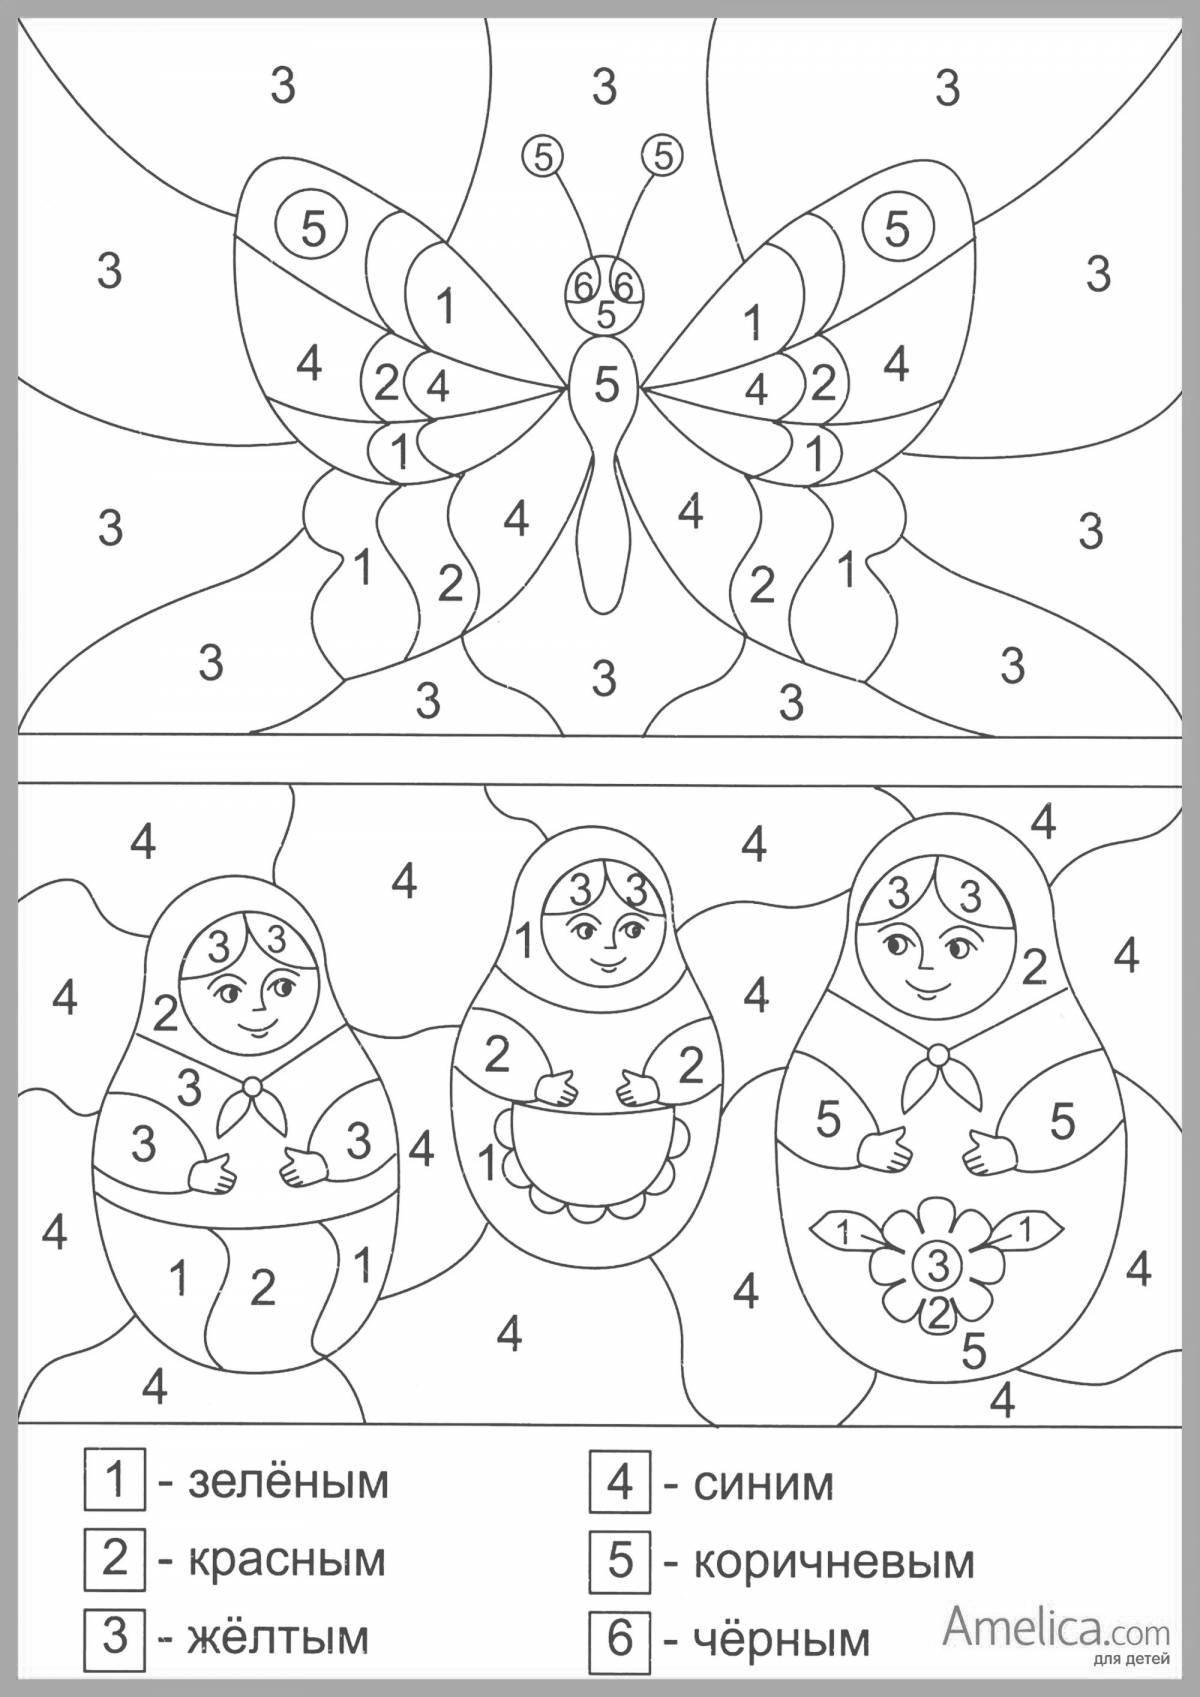 Colorful number coloring page for kids